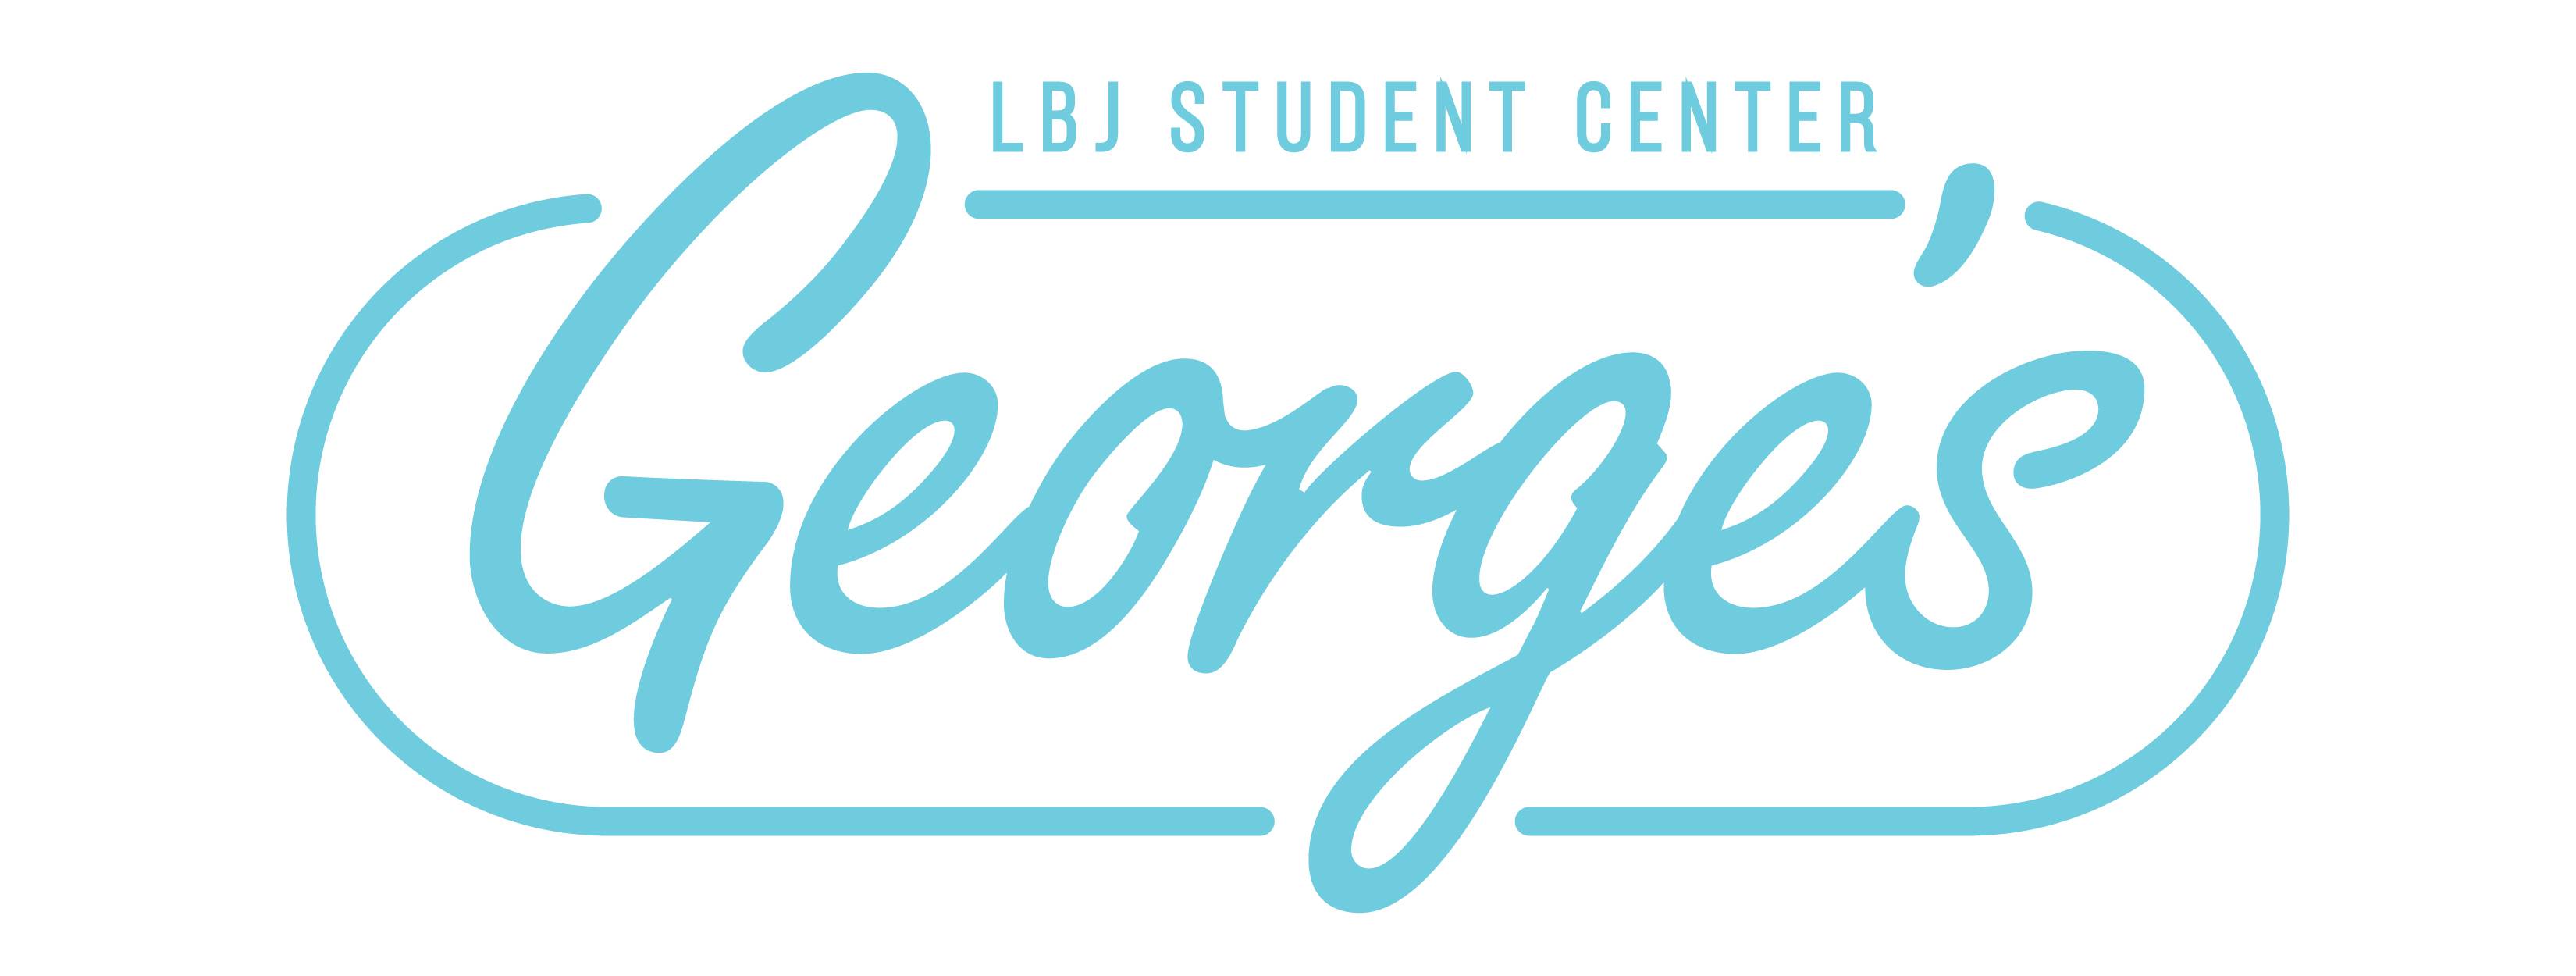 LBJ Student Center George's Here for a good time logo